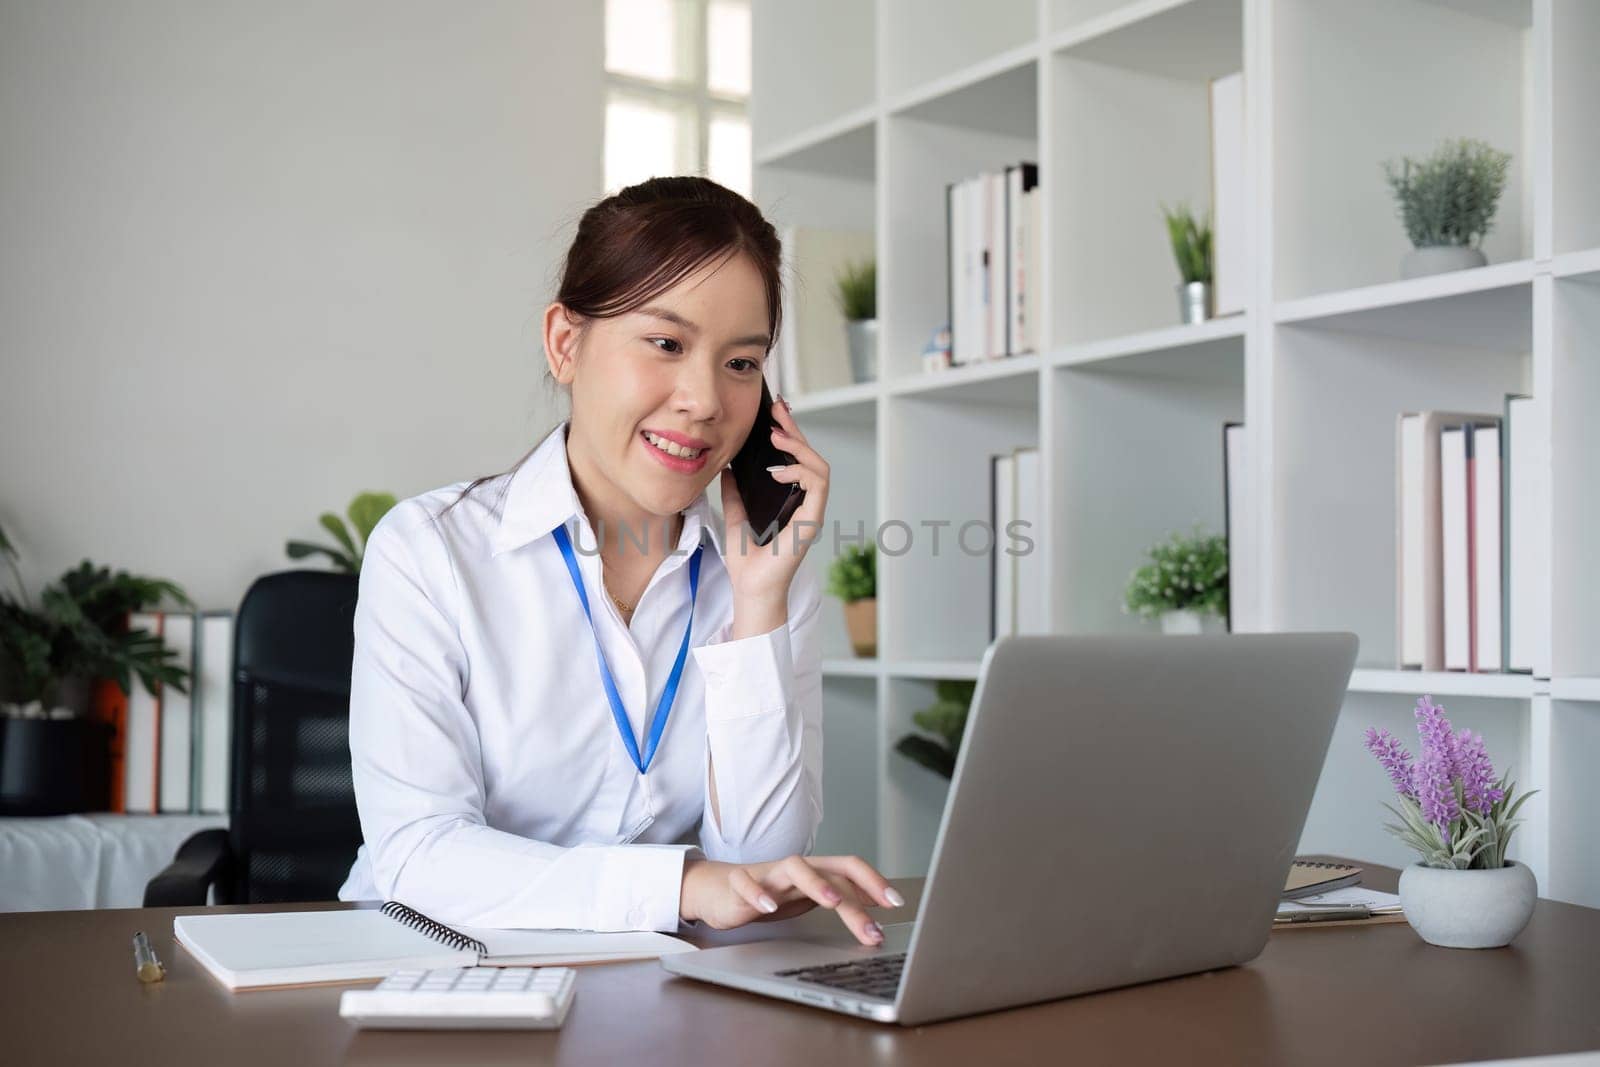 Young businesswoman talking on the phone in an online business meeting using a laptop in a modern home office..